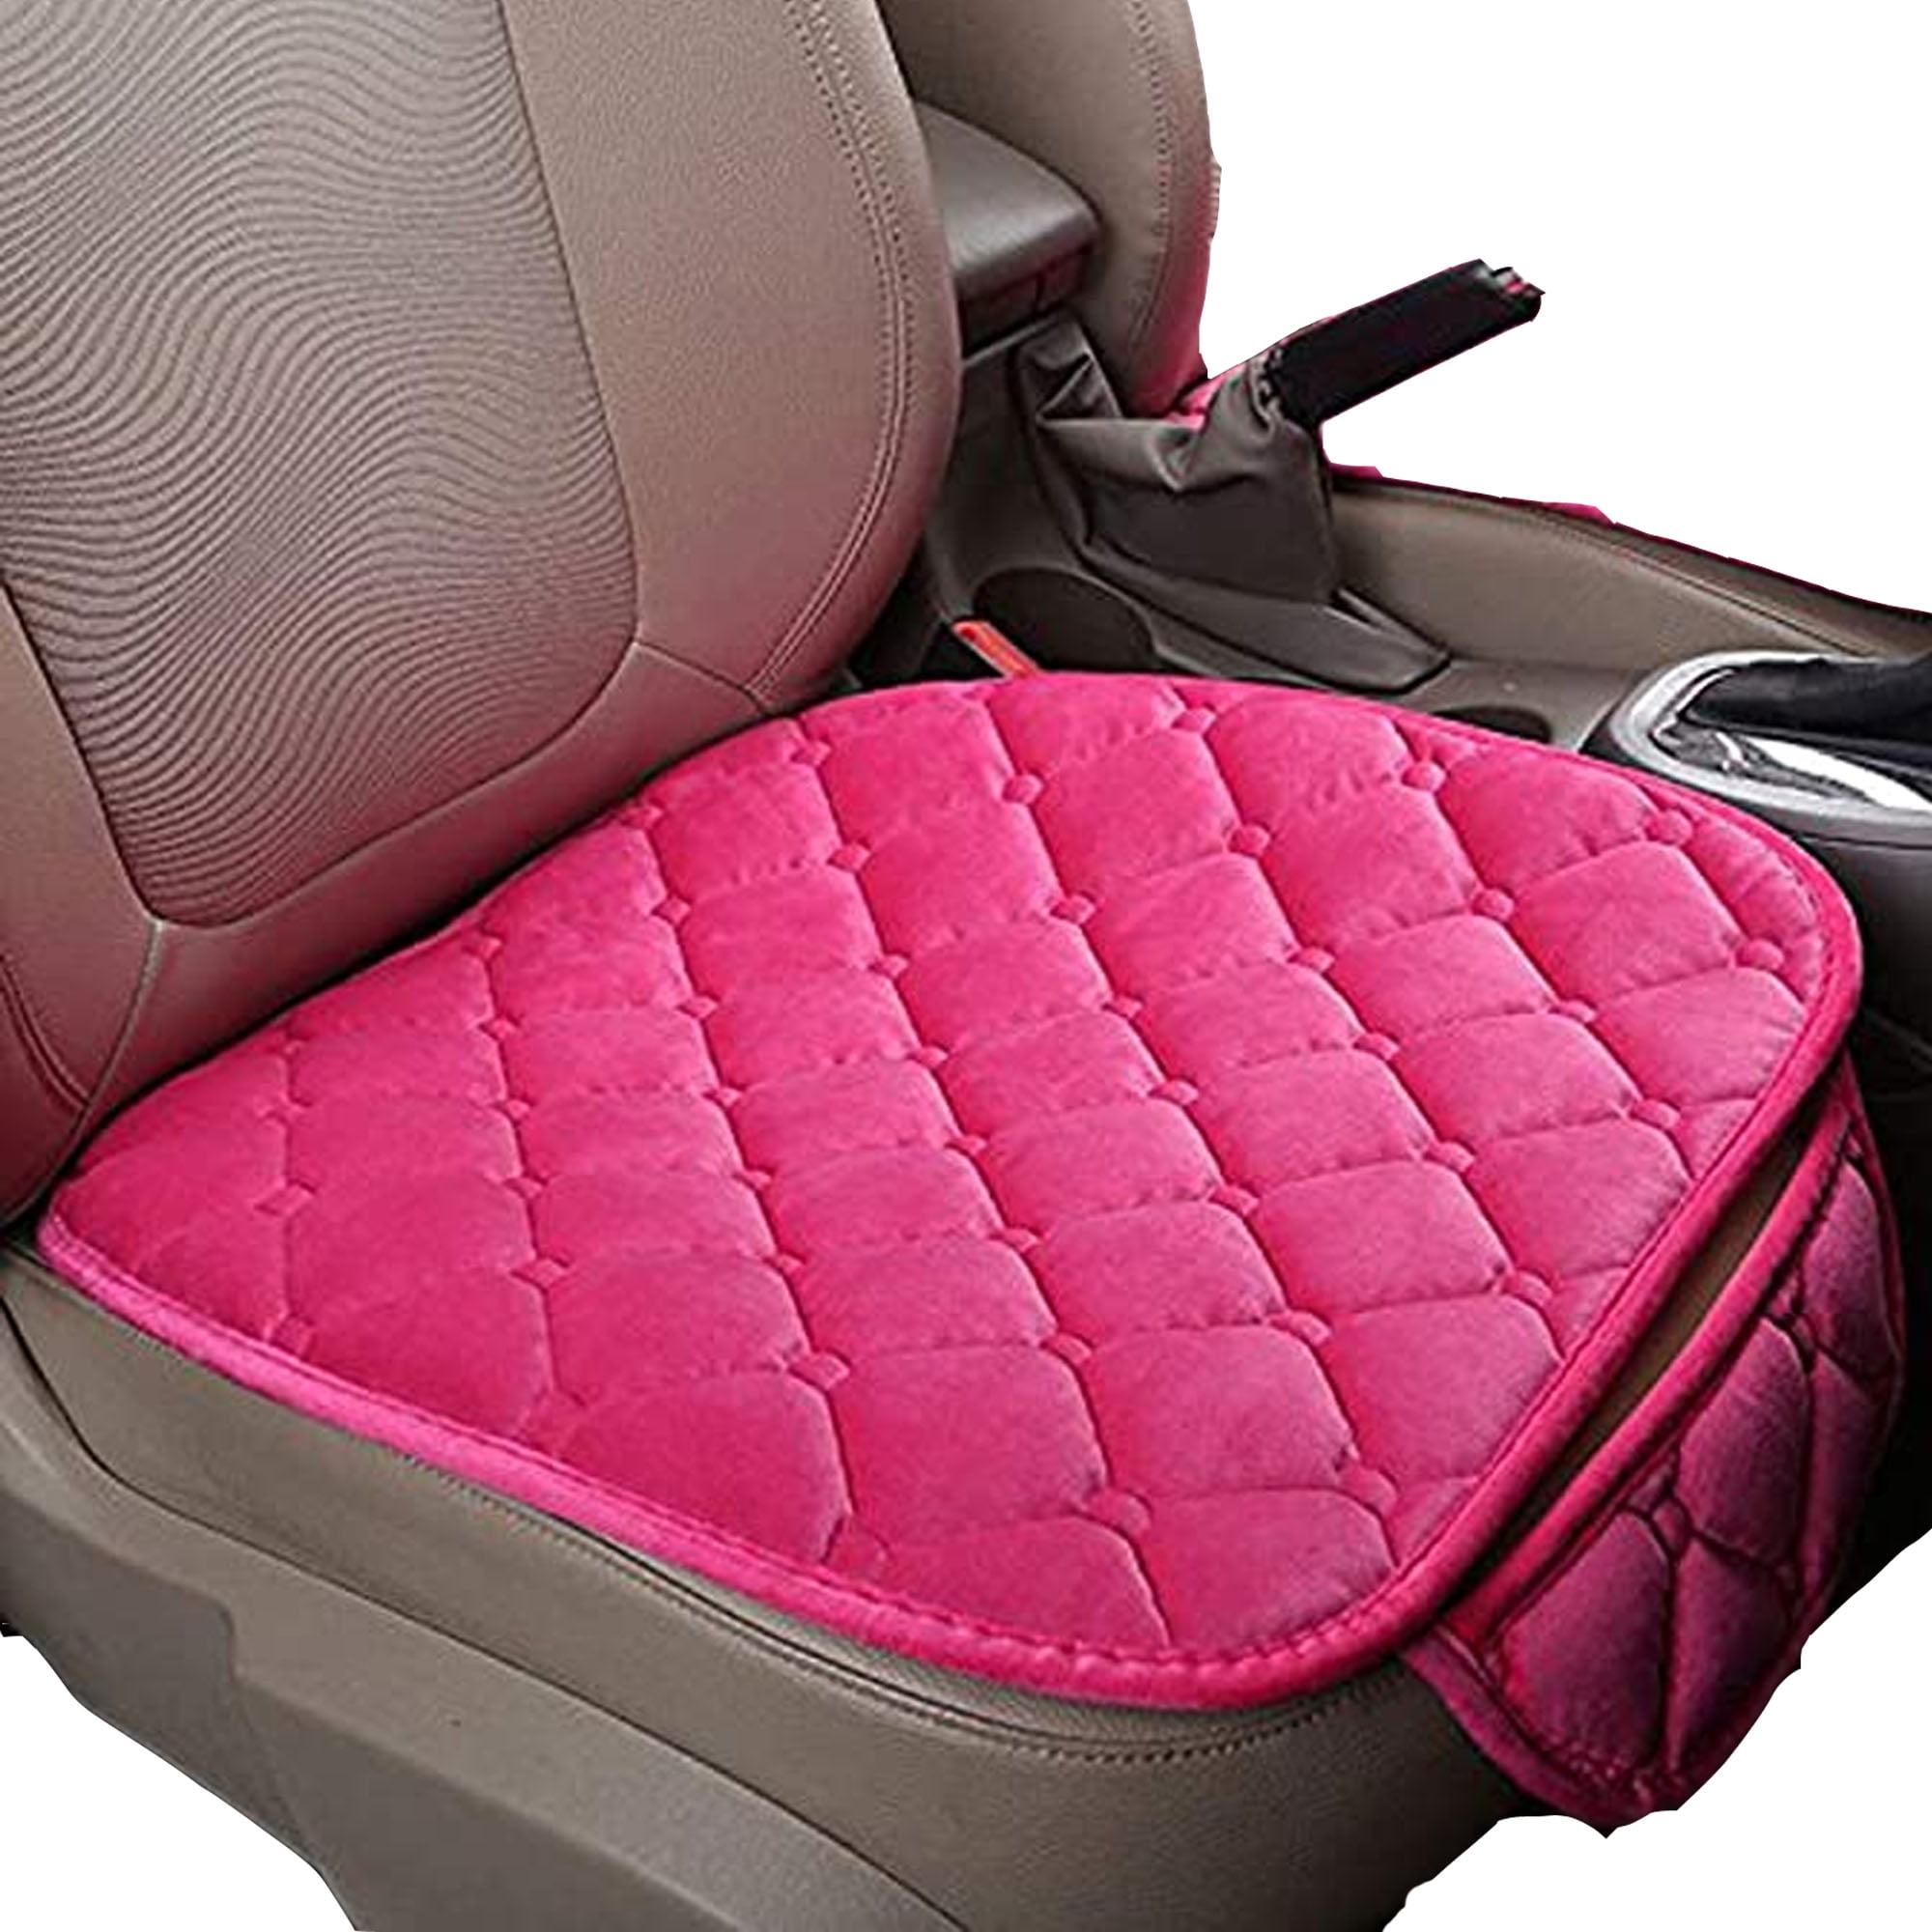 CAR SEAT COVERS FIAT 500 WITH LOGO SPECIFIC LINERS PINK COLOUR